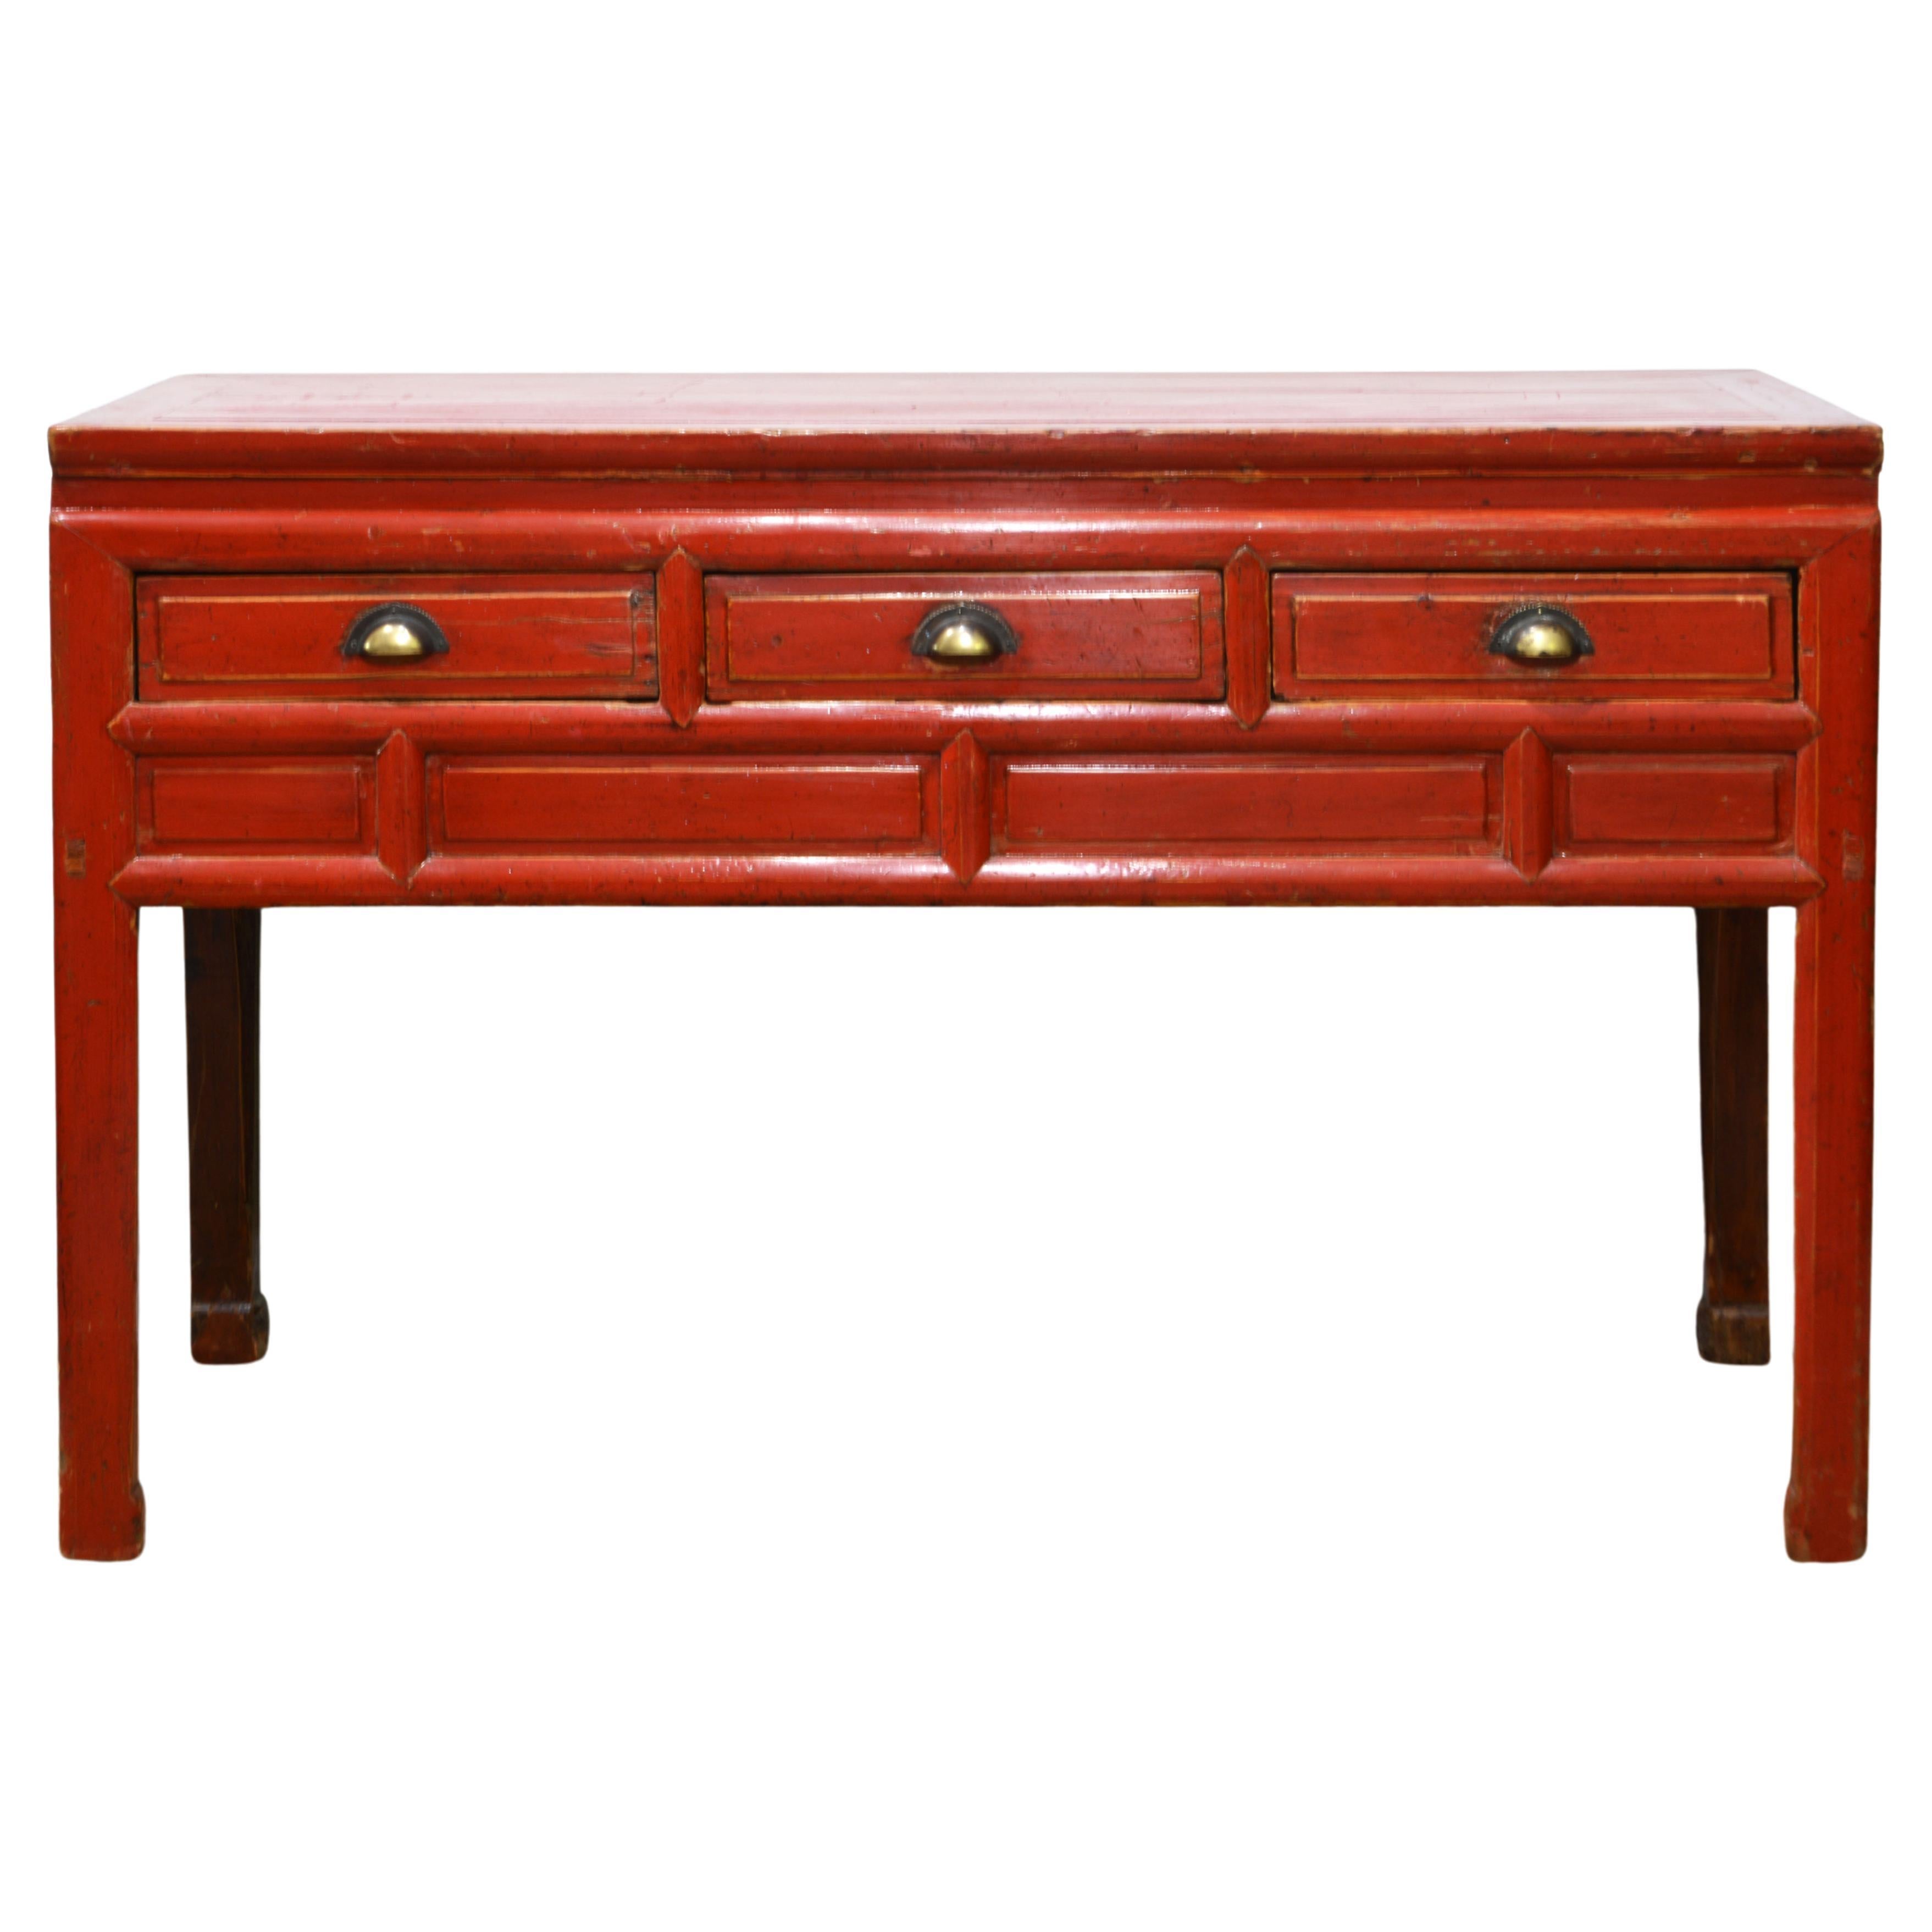 Original 19th C Chinese Partly Red Lacquered Three Drawer Storage Console Table 